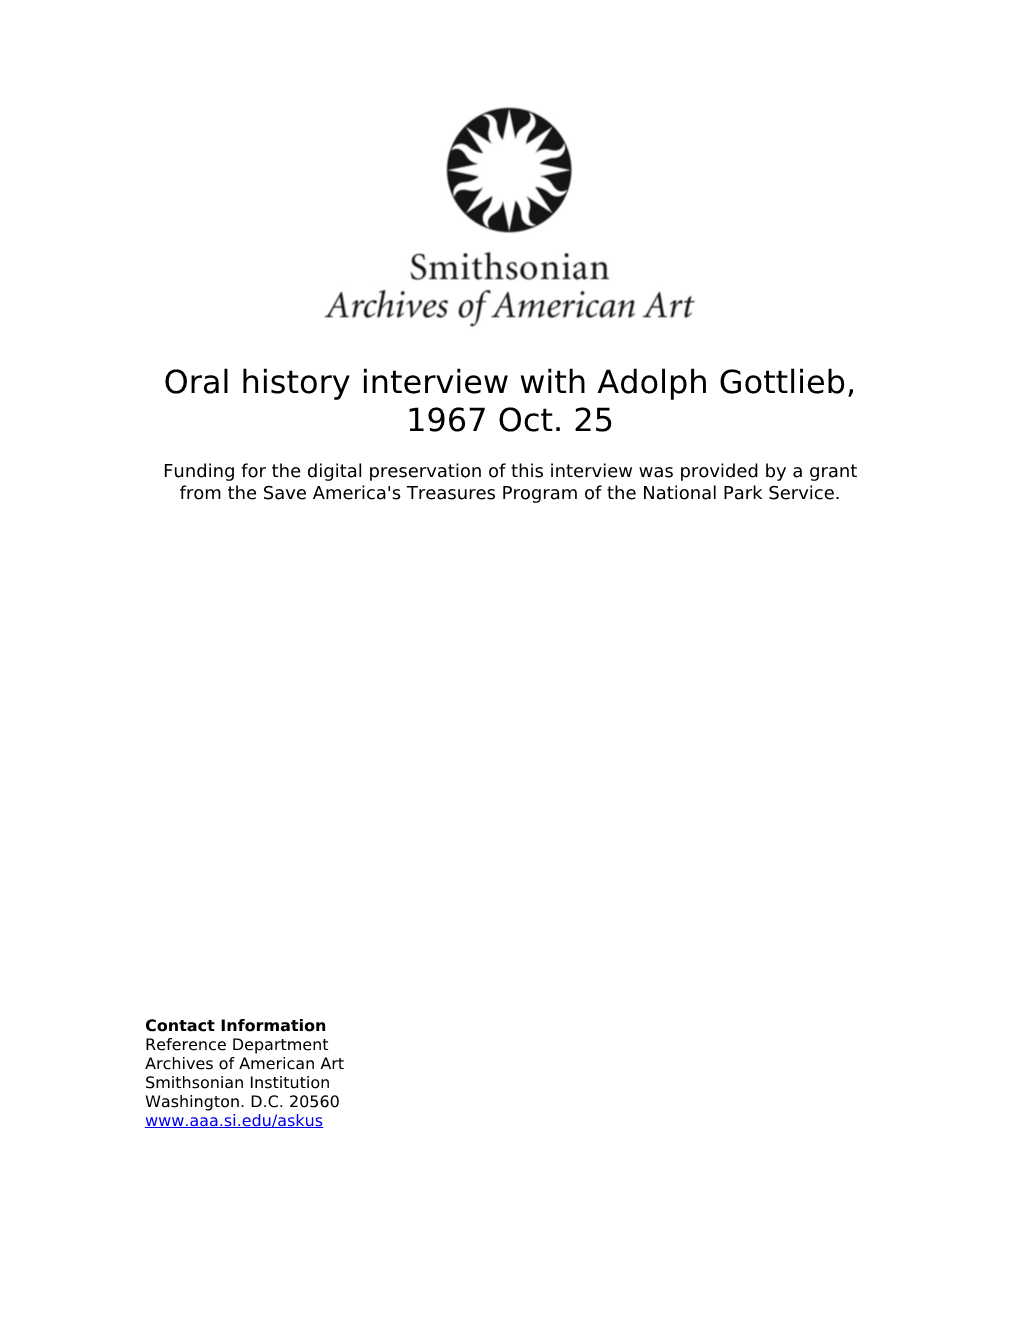 Oral History Interview with Adolph Gottlieb, 1967 Oct. 25